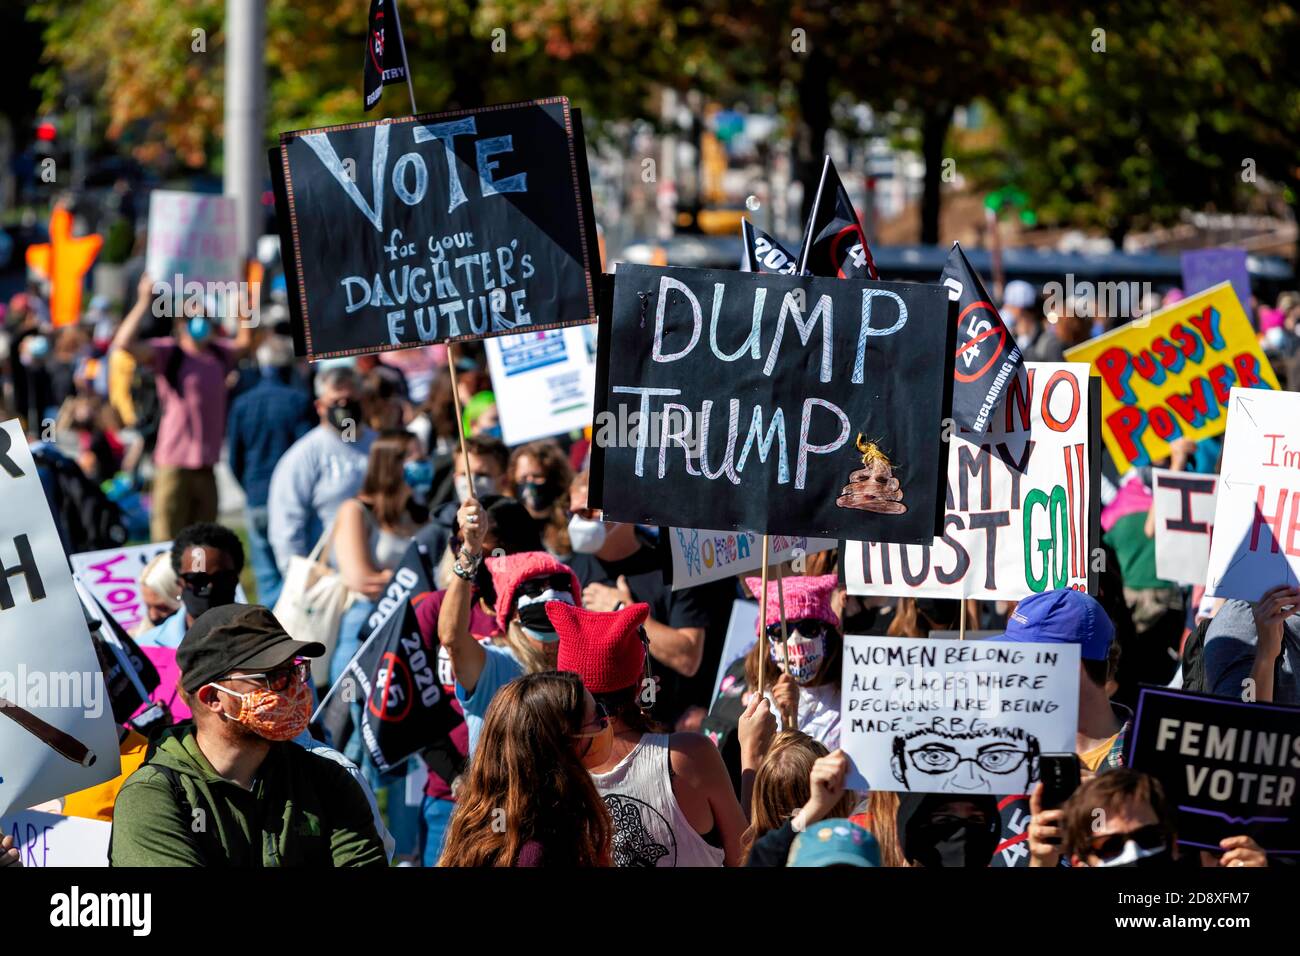 Signs at the Count on Us Women's March urge voters to 'Dump Trump' and vote him out of office in support of women's rights, Washington, DC, USA Stock Photo